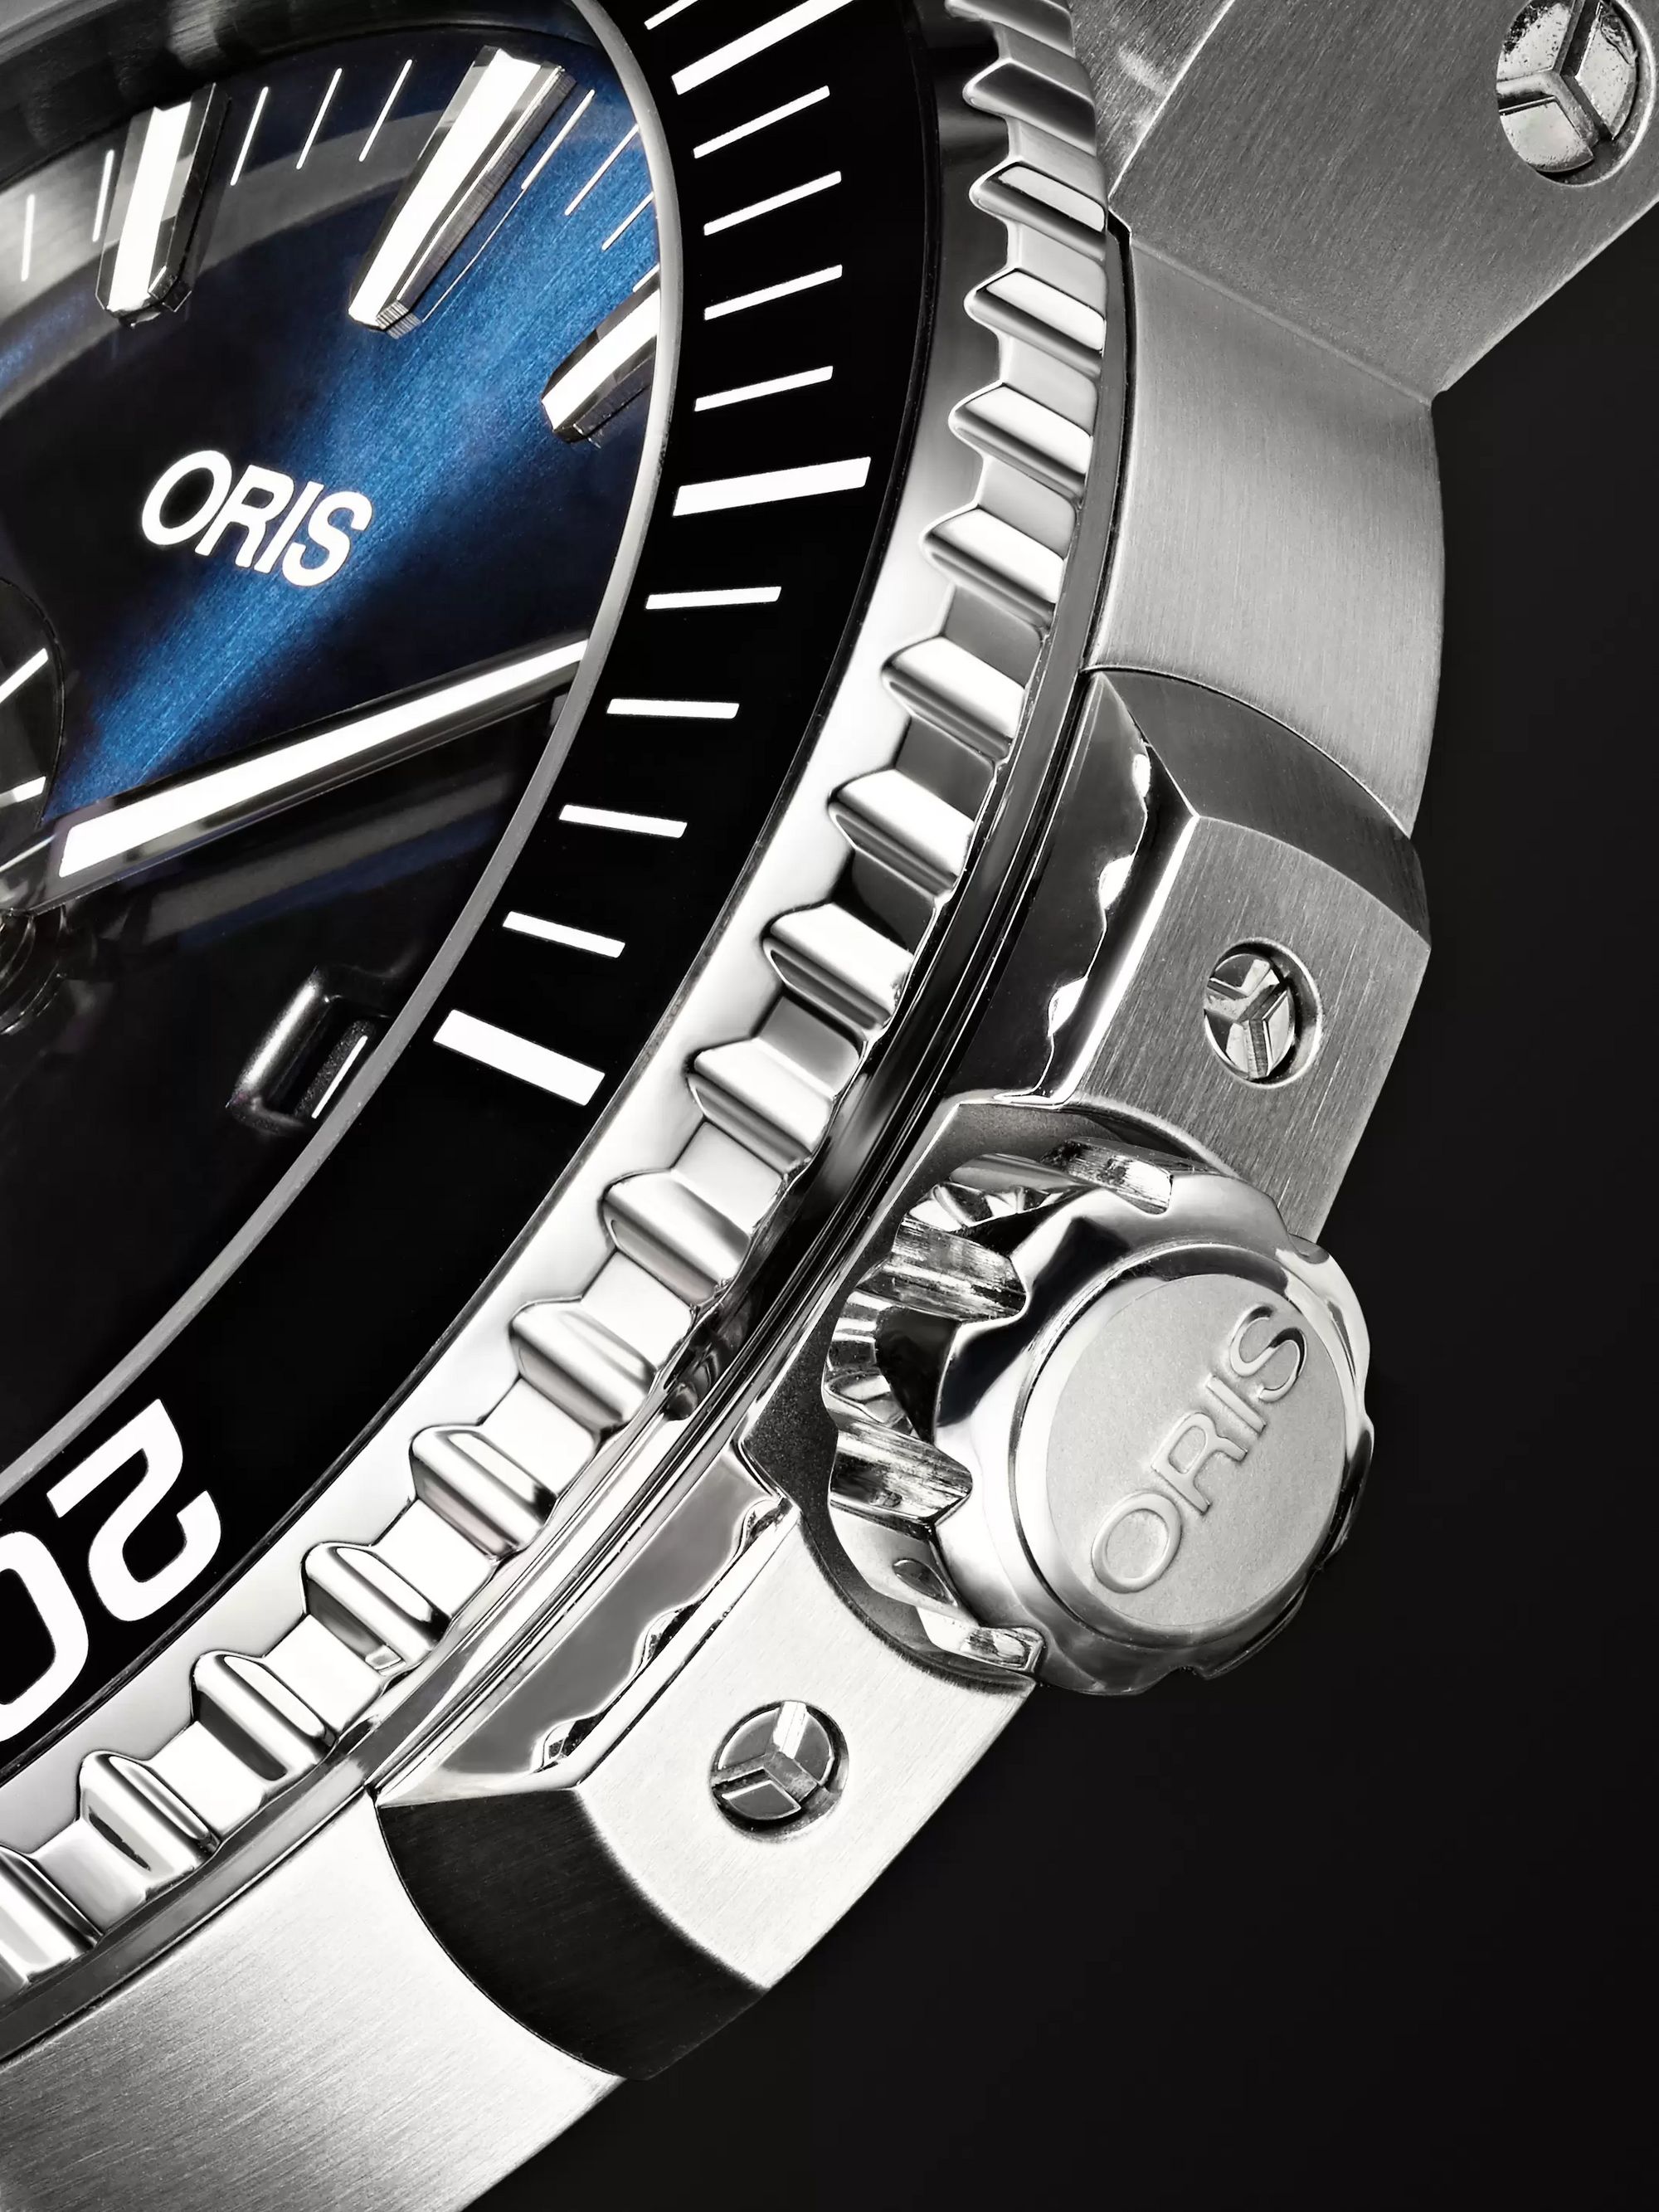 ORIS Aquis Small Second Date Automatic 45.5mm Stainless Steel Watch, Ref. No. 01 743 7733 4135-07 8 24 05PEB